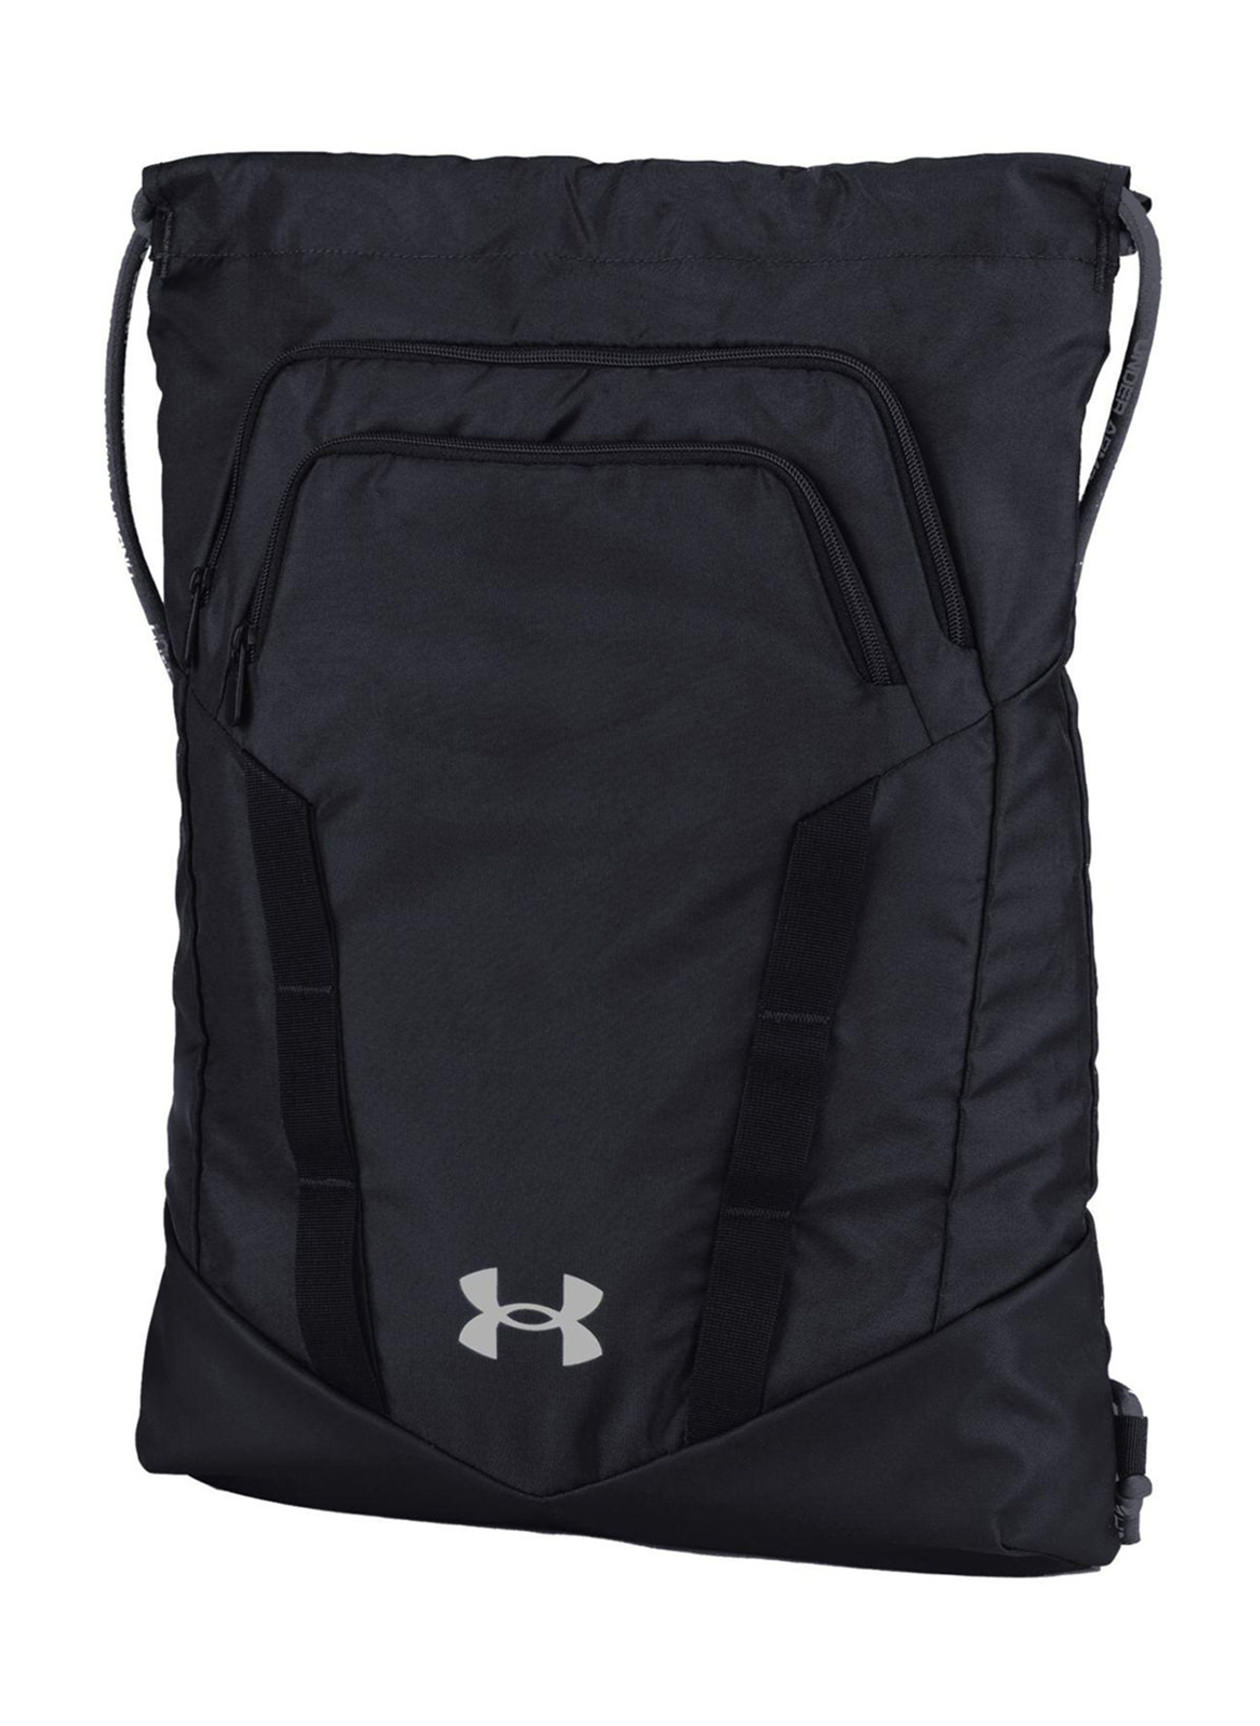 Under Armour Black Undeniable Sackpack 2.0